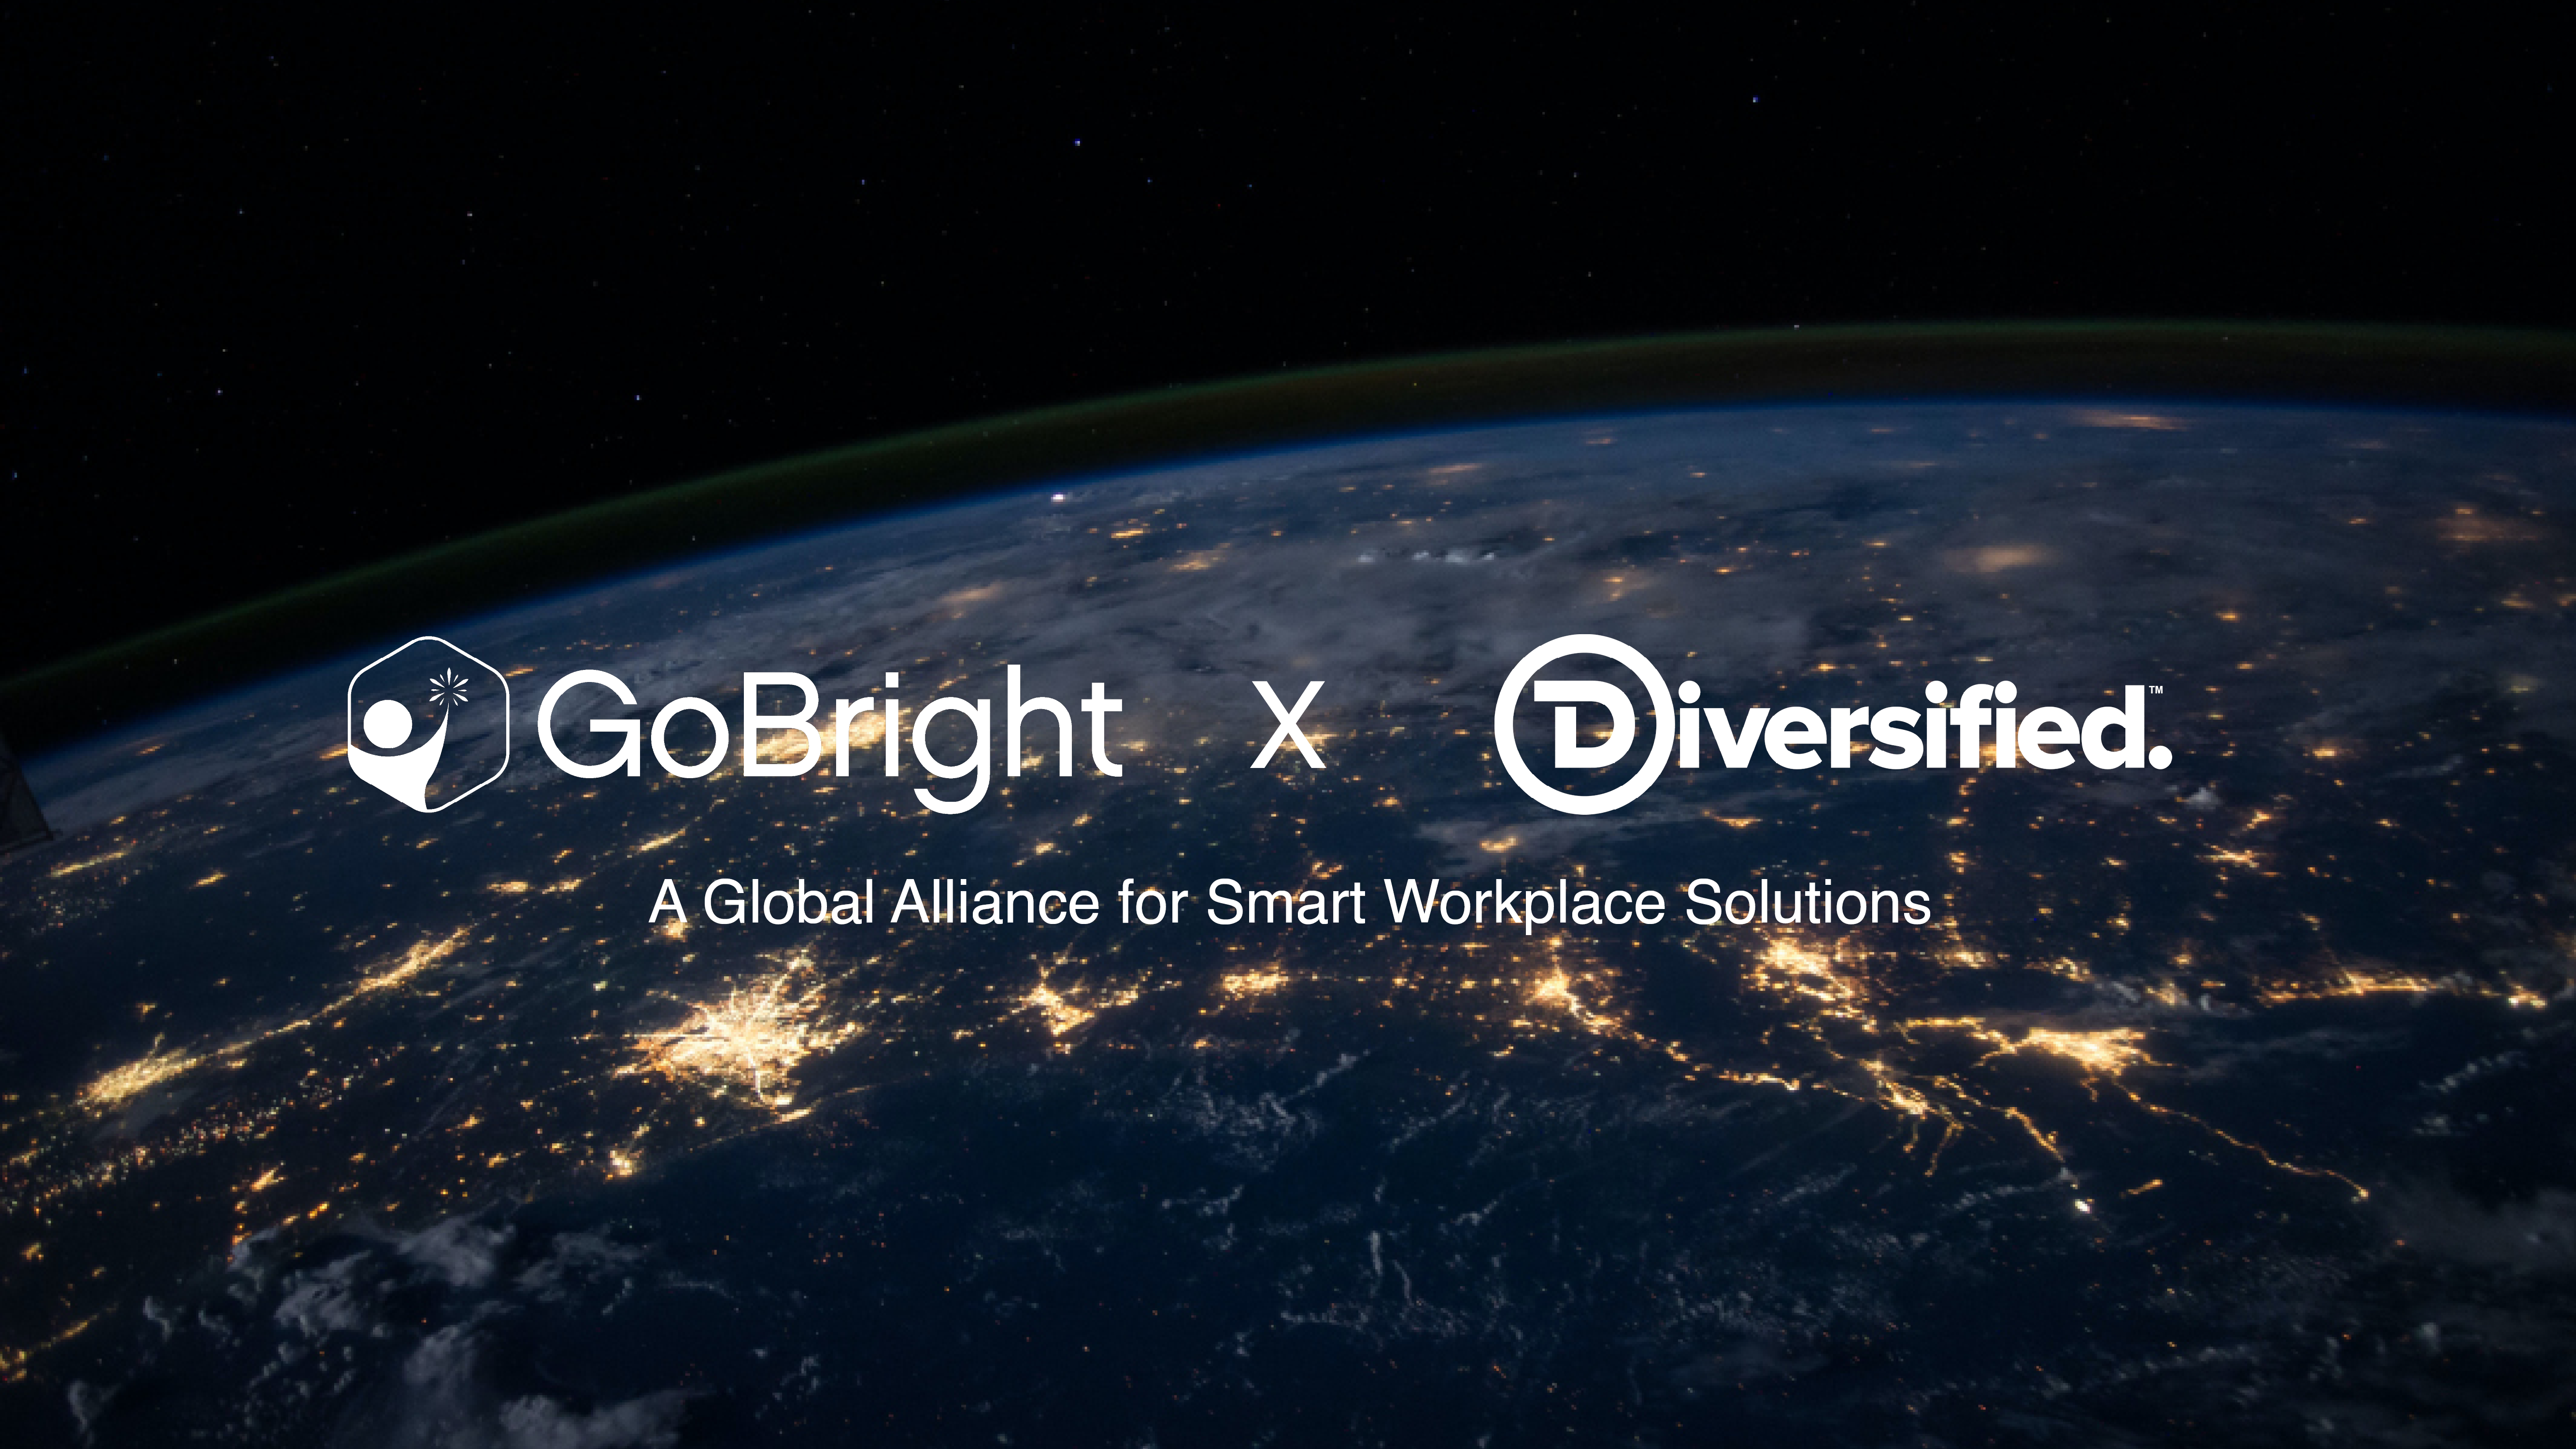 GoBright and Diversified: A Global Alliance for Smart Workplace Solutions